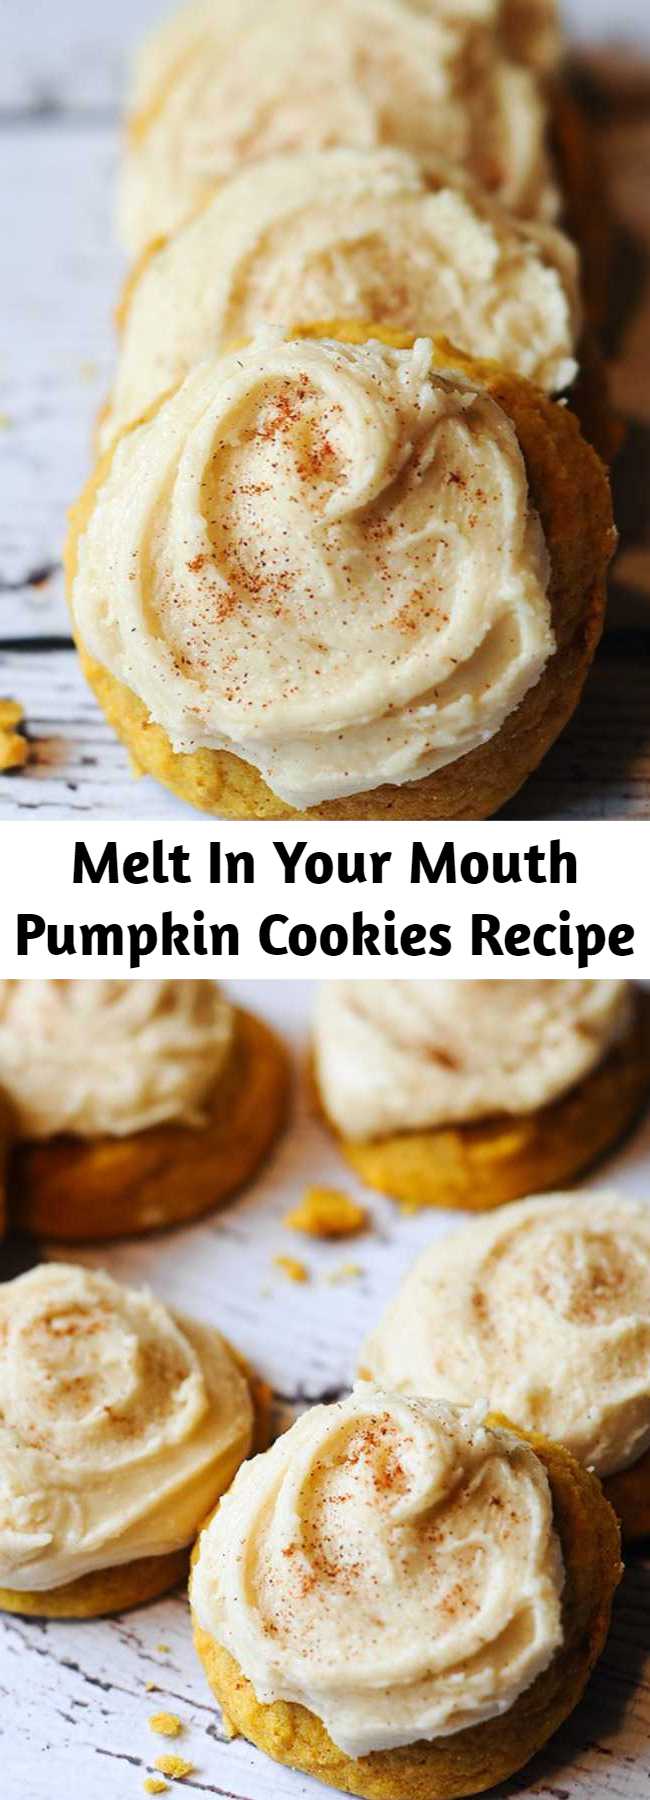 Melt In Your Mouth Pumpkin Cookies Recipe - I just made these cookies and they are AMAZING. Perfect pumpkin recipe and perfect pumpkin cookies. Pin this dessert now and make it this fall! If you’re ready to get your pumpkin fix or you’re just pinning great fall pumpkin recipes, you definitely don’t want to miss this melt-in-your-mouth pumpkin cookies recipe!